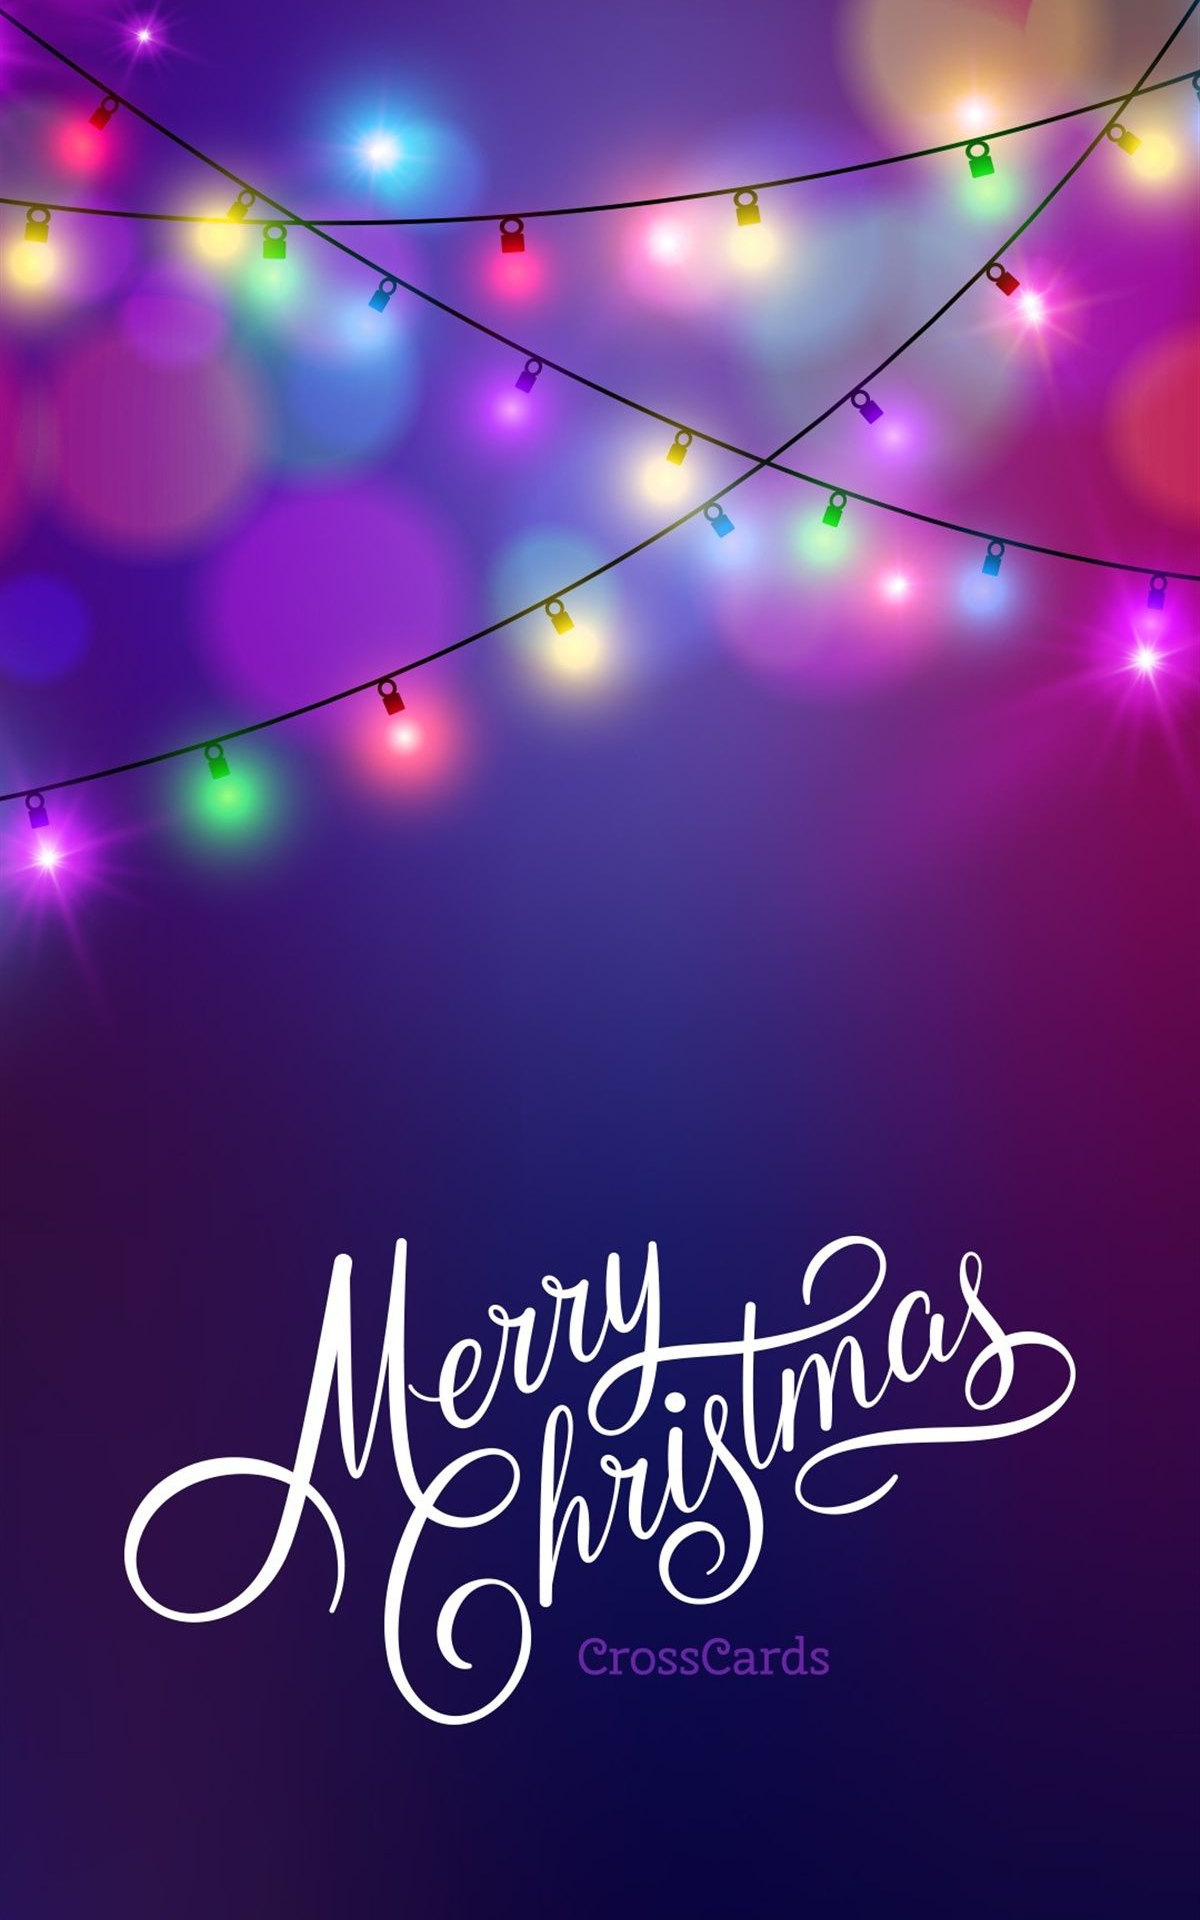 Free download Merry Christmas mobile phone wallpaper in 2020 Christmas phone [1200x2133] for your Desktop, Mobile & Tablet. Explore Christmas 2020 Phone Wallpaper. Christmas 2020 Phone Wallpaper, Christmas 2020 Wallpaper, CNY 2020 Phone Wallpaper